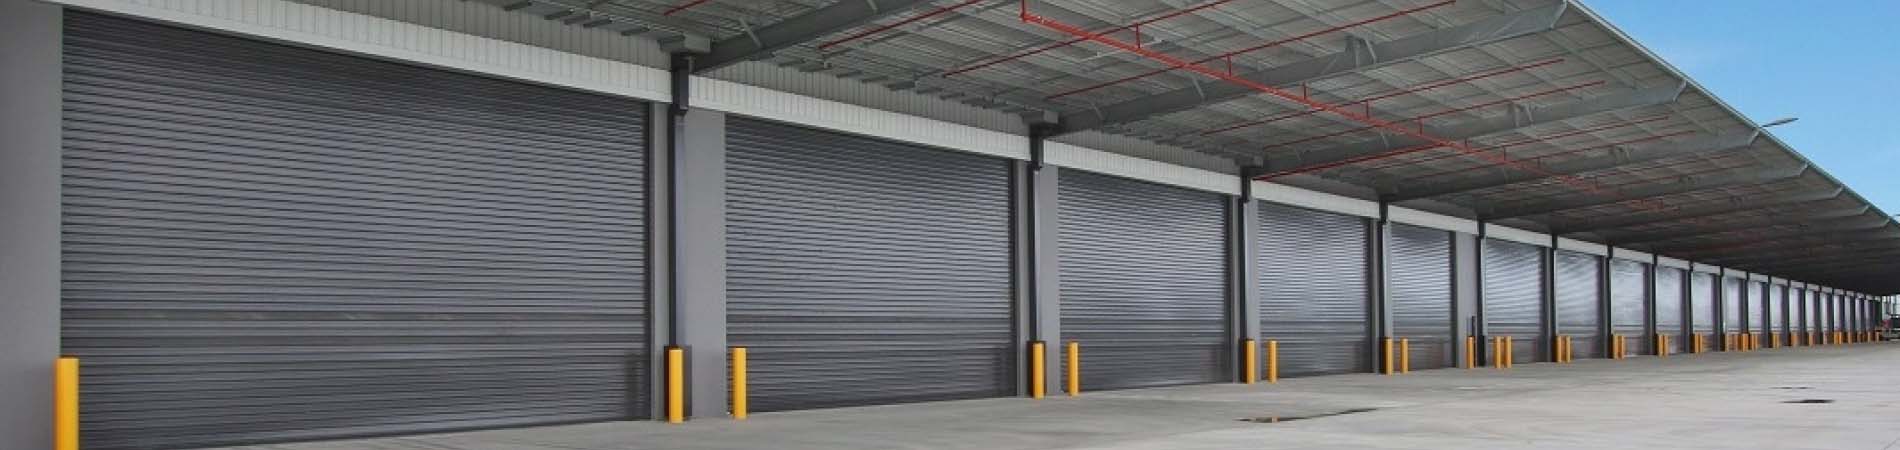 Steel roller shutter doors closed, securing a building